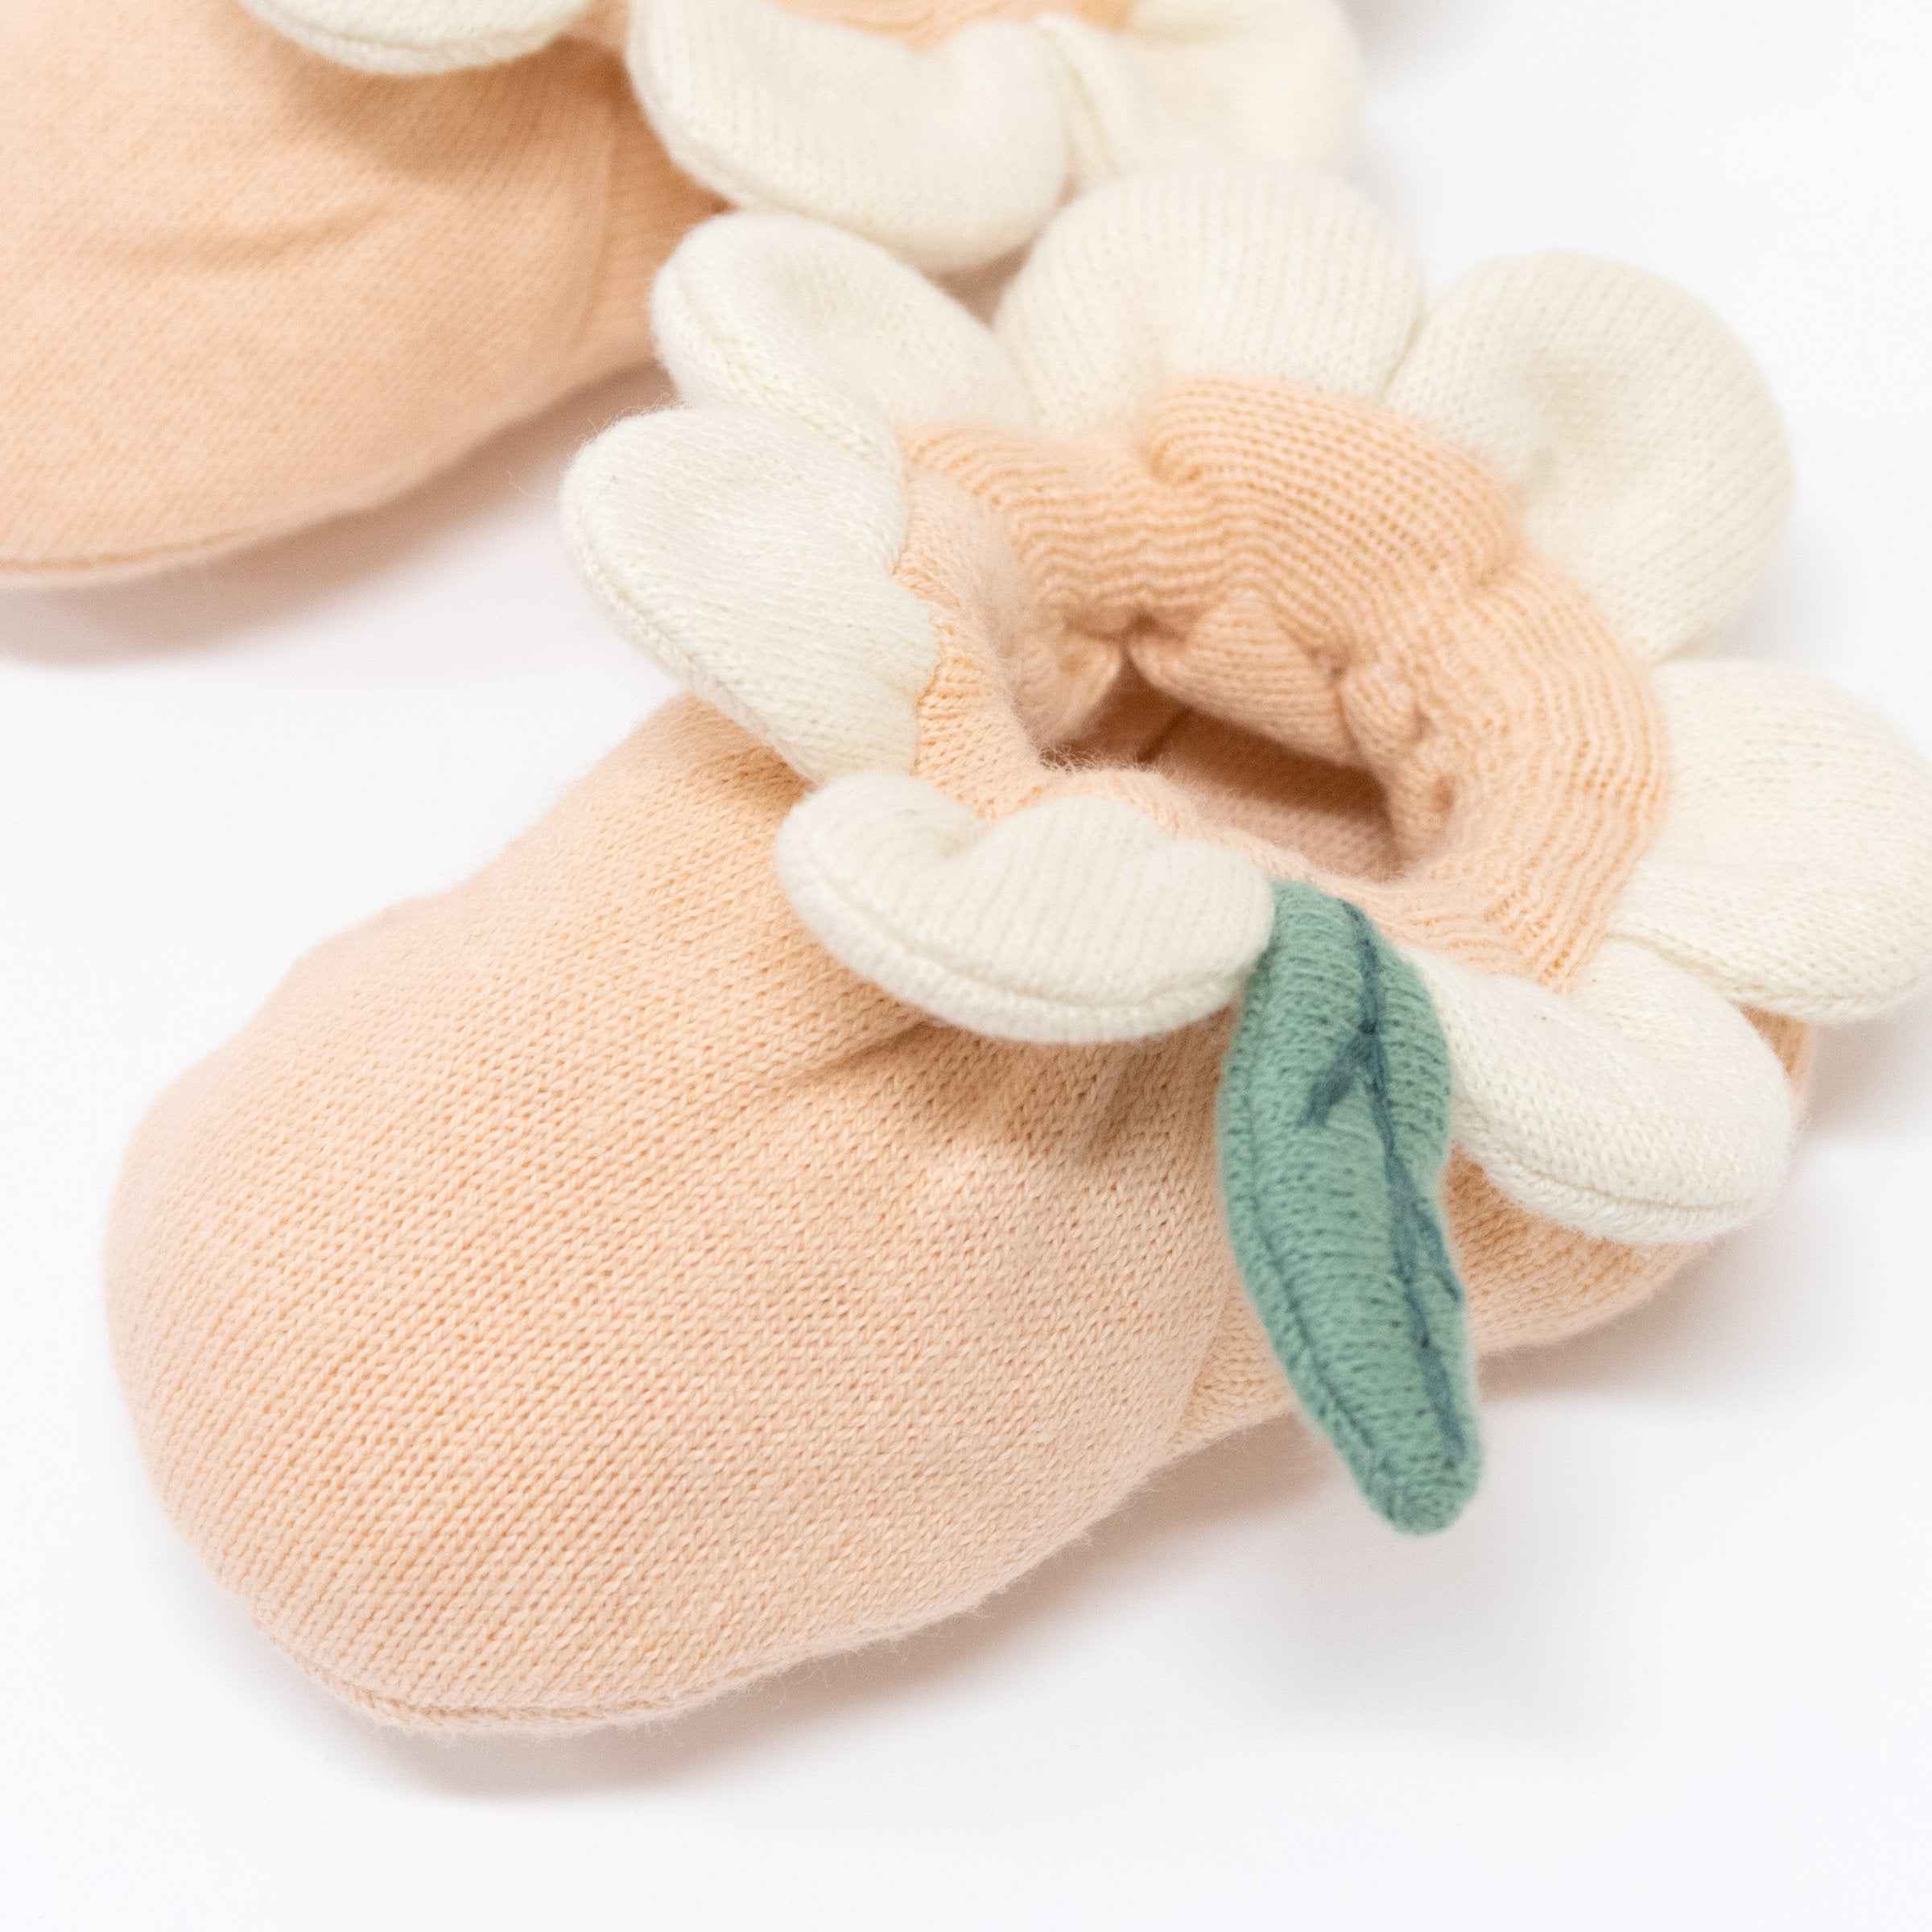 Adorable organic cotton baby clothes and baby rattle with floral details.